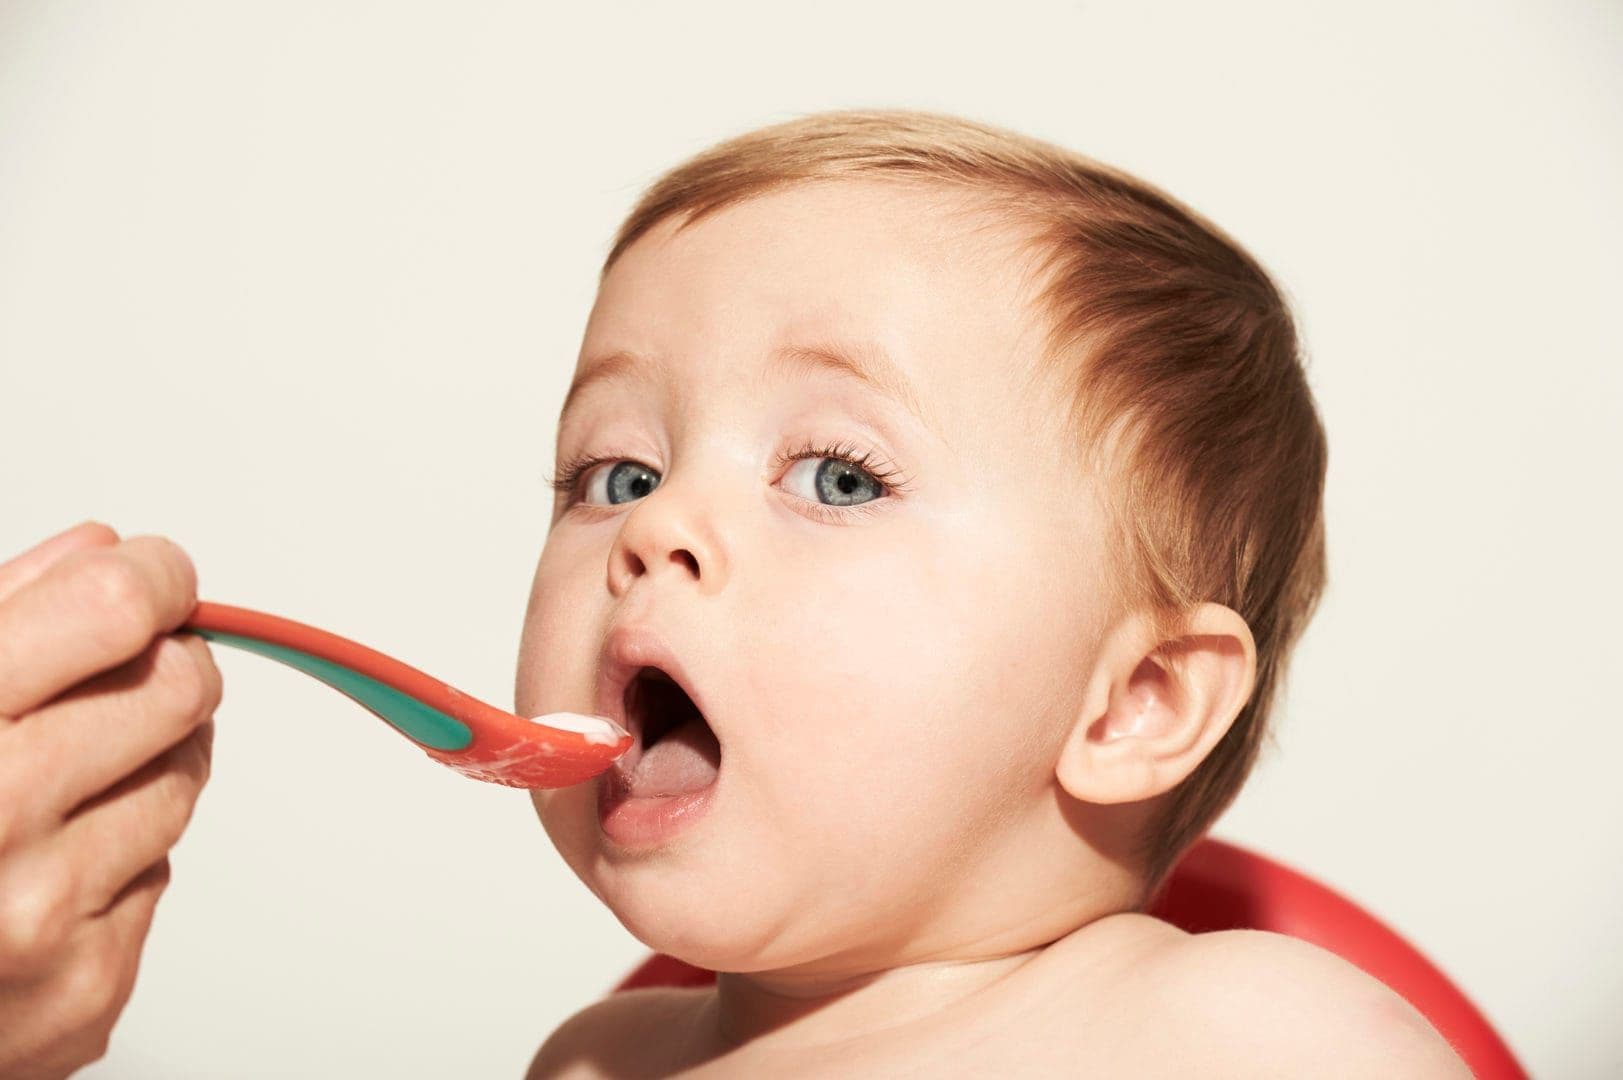 Stage 1 baby food: How to know when to start solids